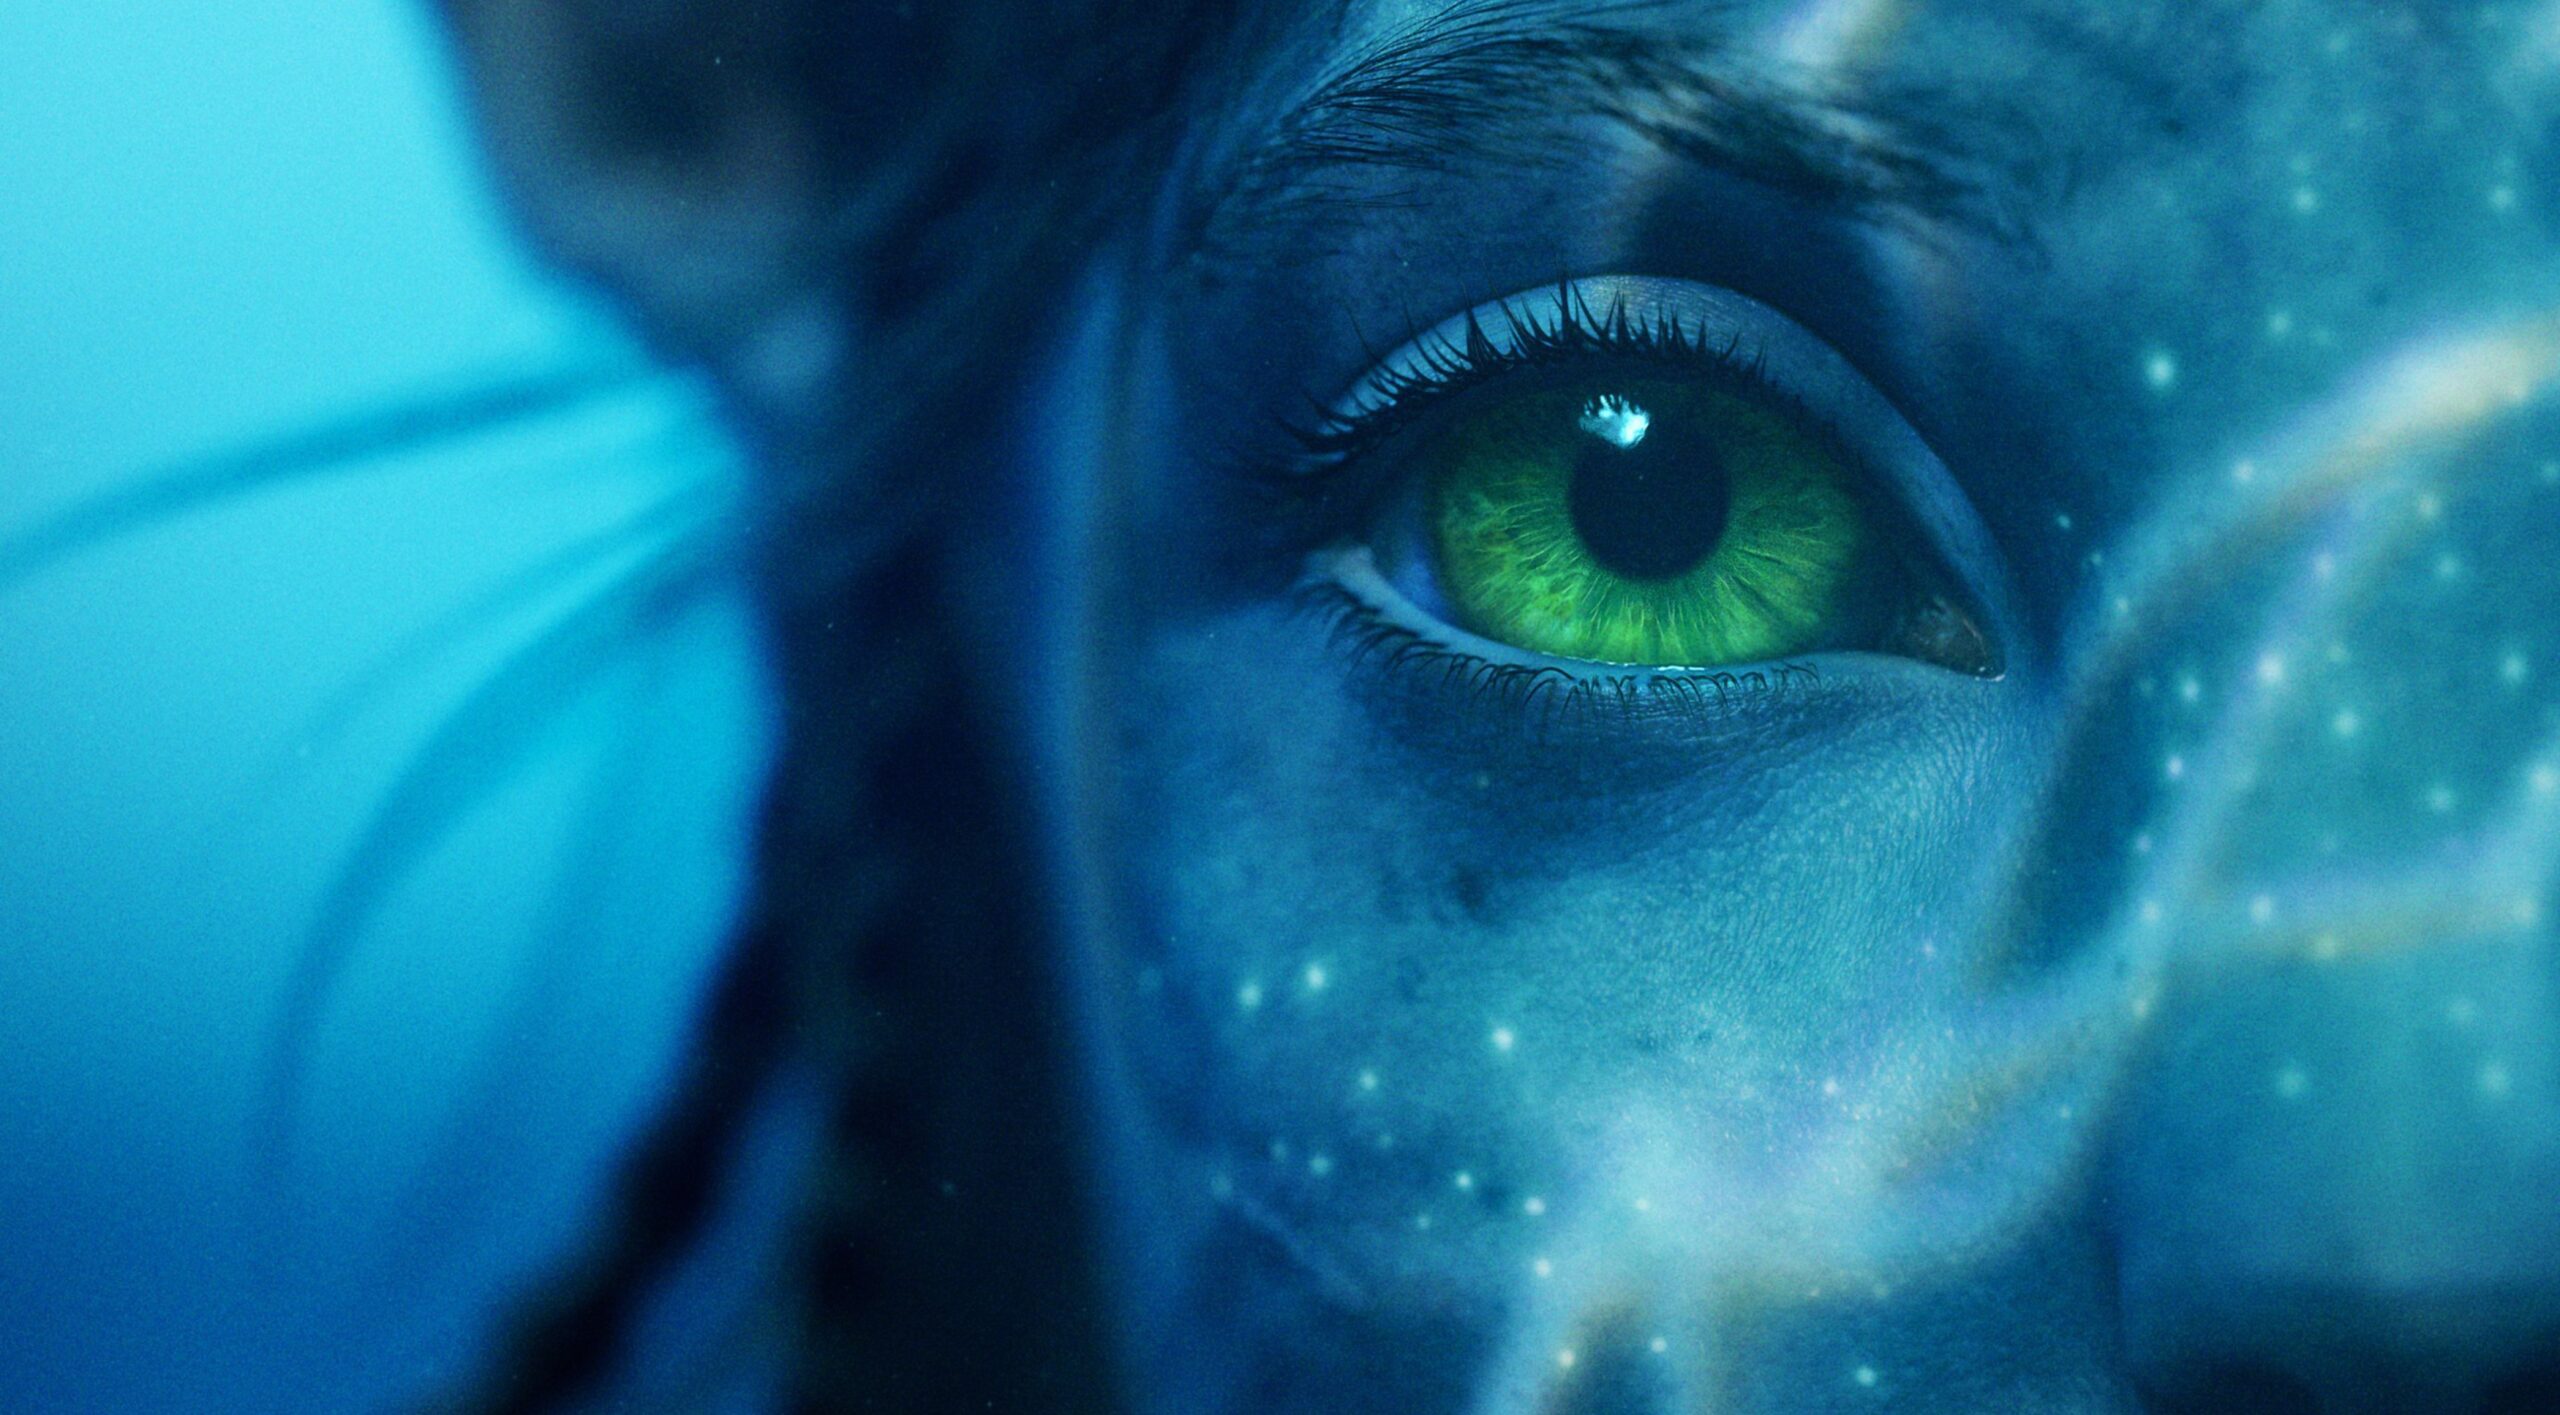 Avatar 2 wallpapers for desktop download free Avatar 2 pictures and  backgrounds for PC  moborg